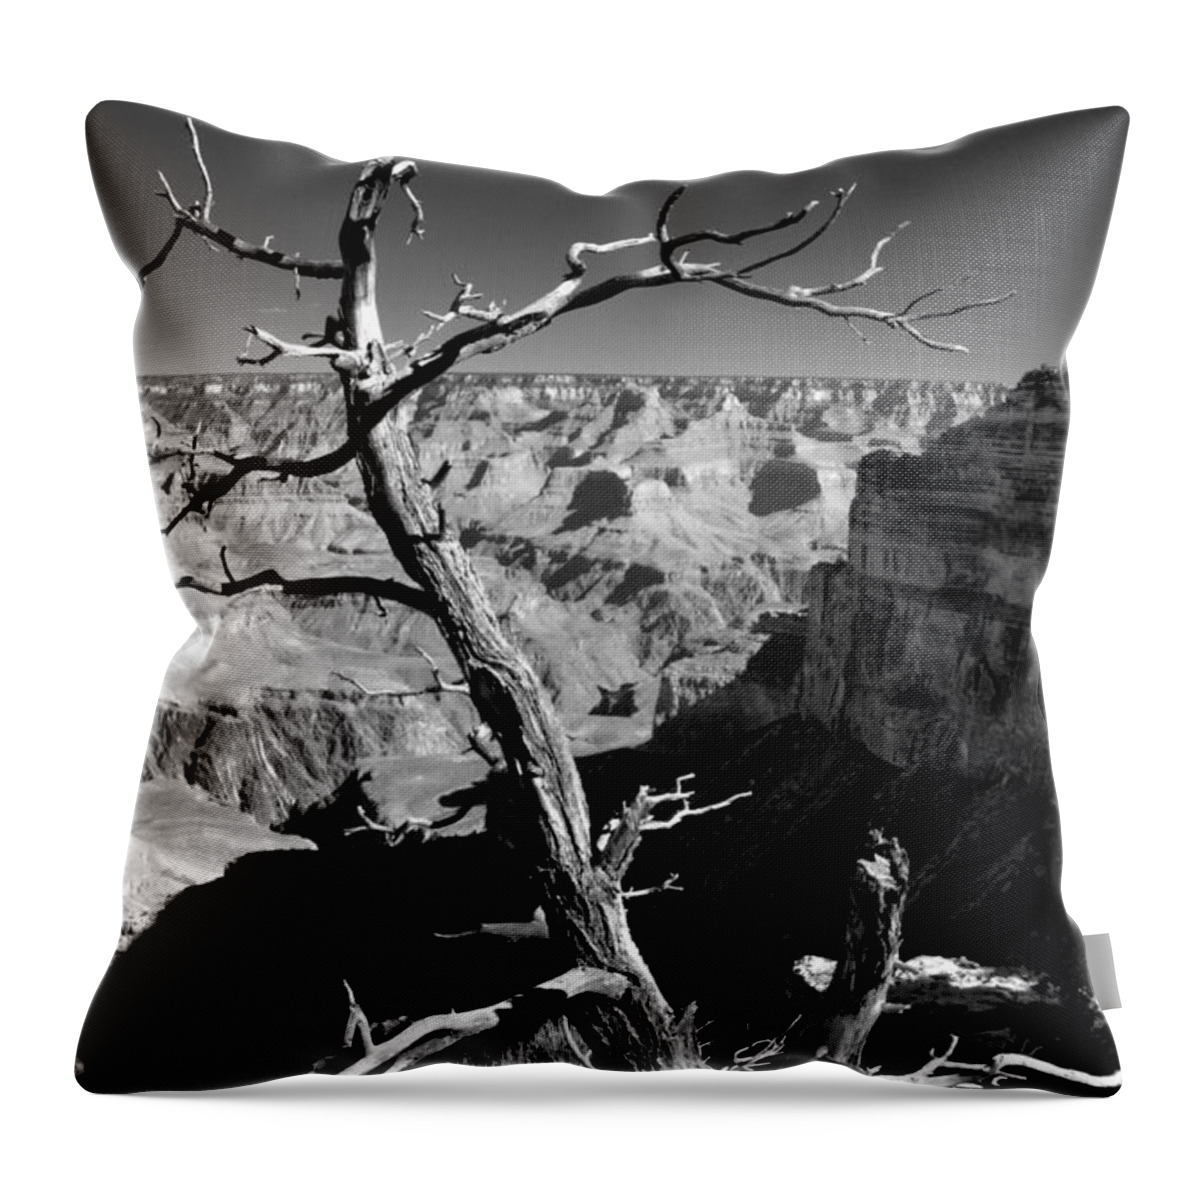 Grand Canyon Bw Throw Pillow featuring the photograph Grand Canyon BW by Patrick Witz